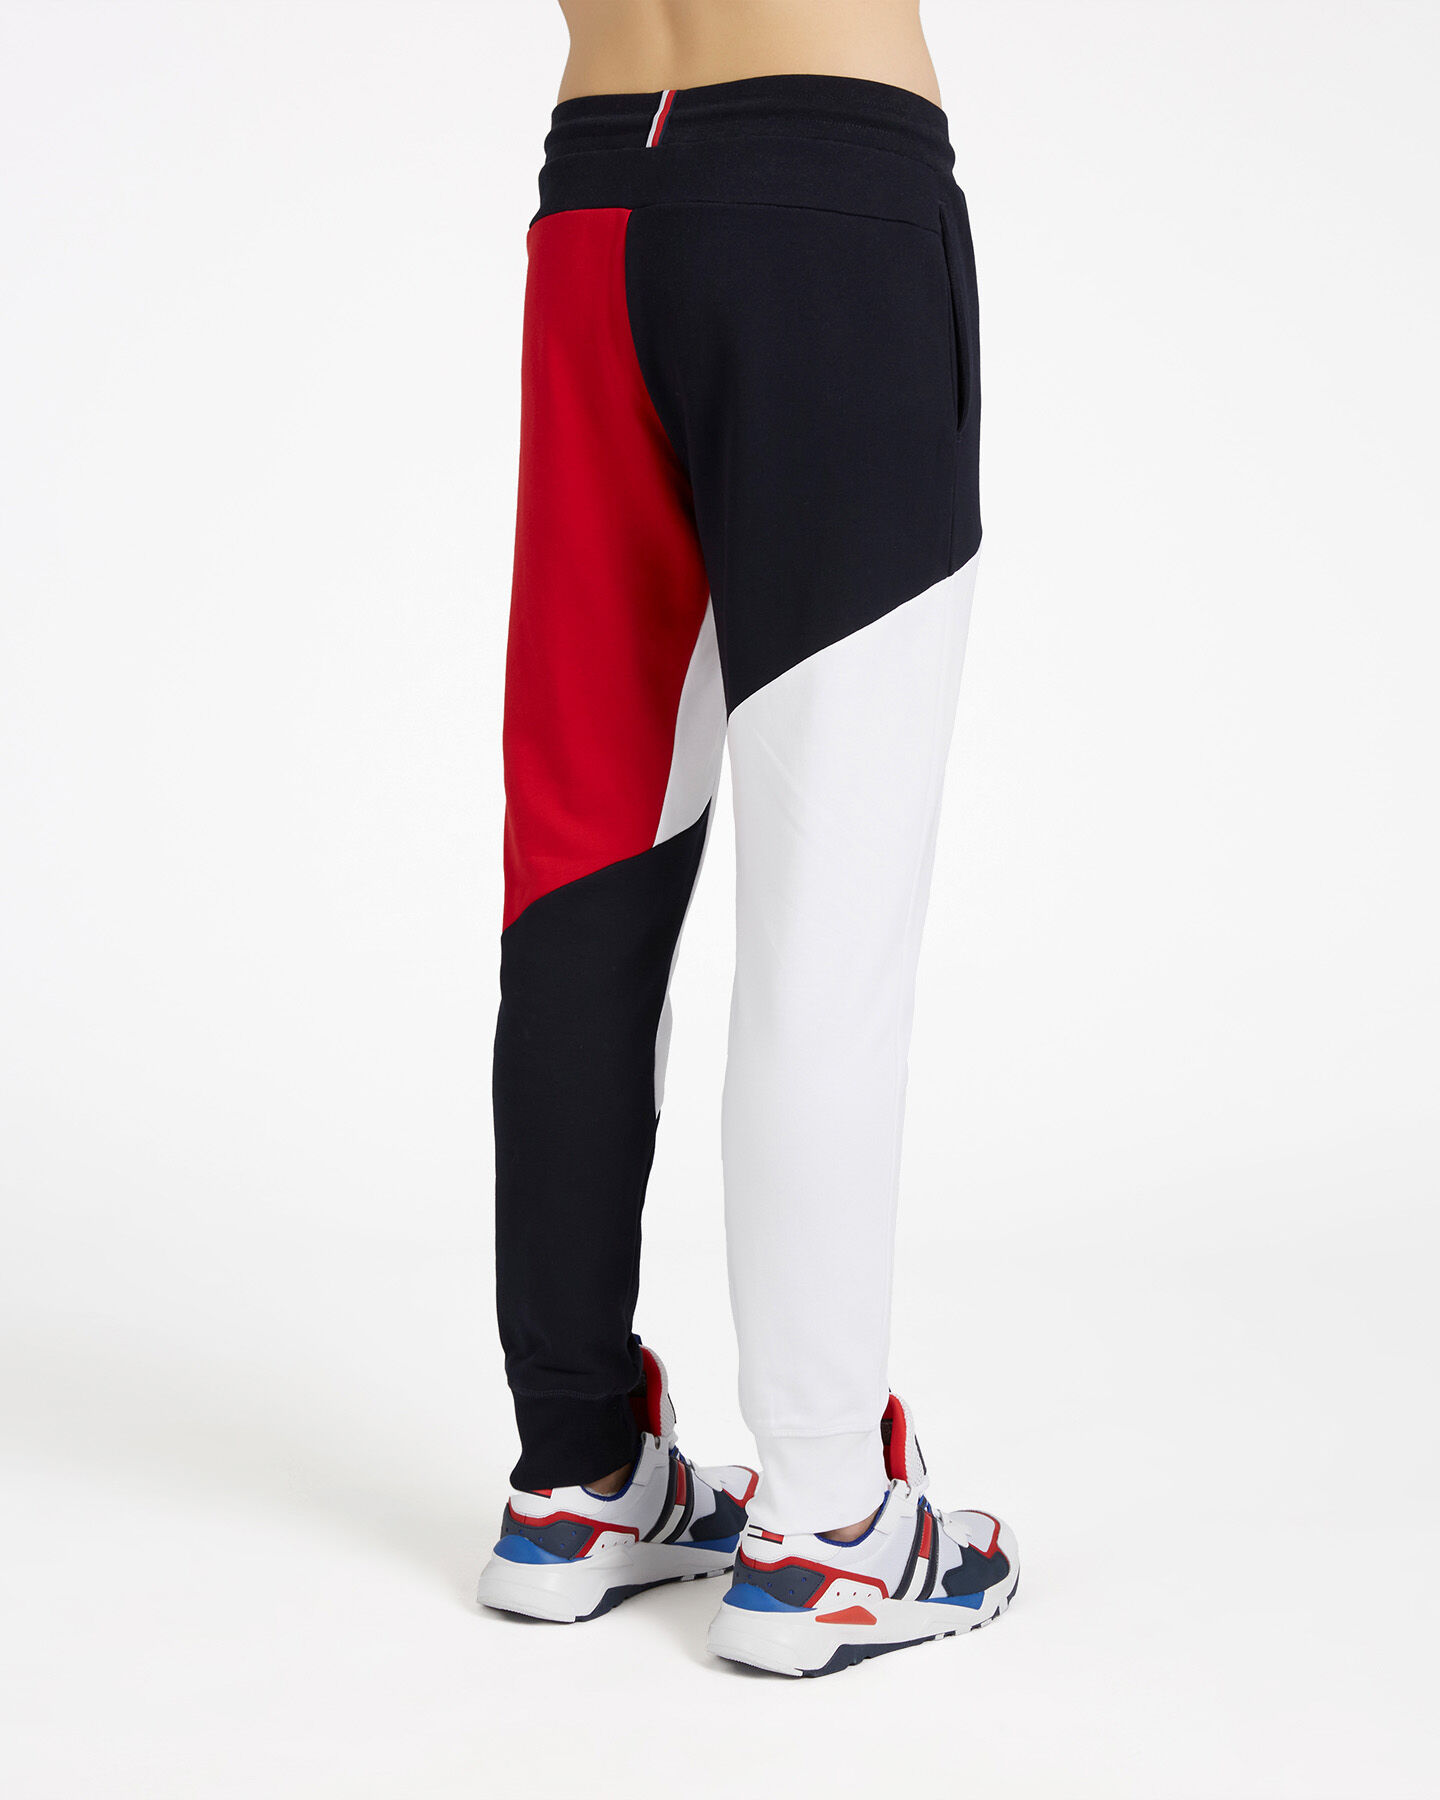  Pantalone TOMMY HILFIGER COLOR M S4089516|DW5|S scatto 1